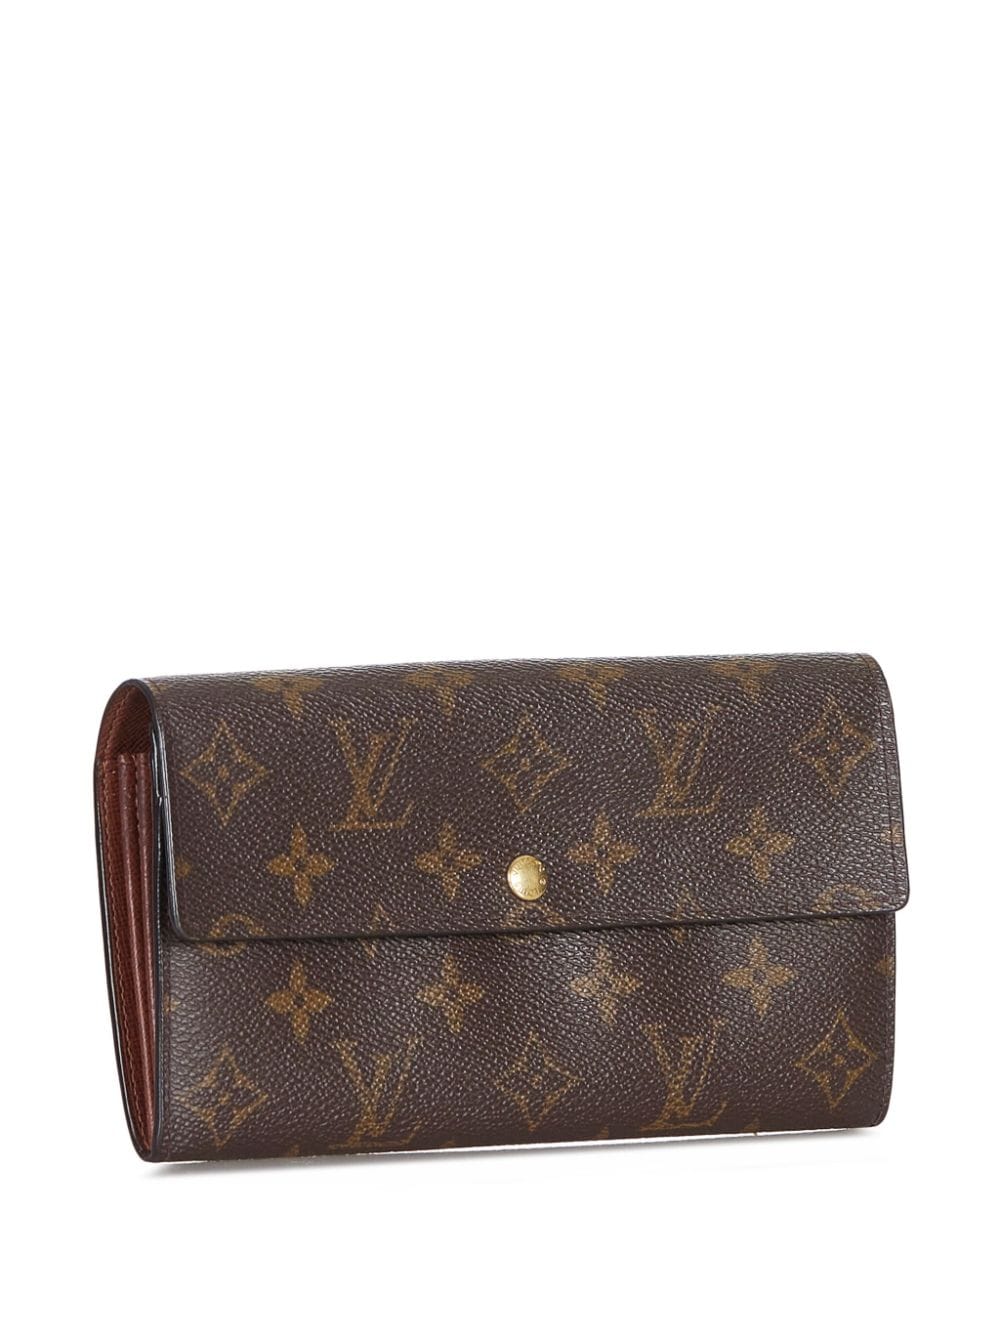 Louis Vuitton Portefeuille Sarah Canvas Wallet (pre-owned) in